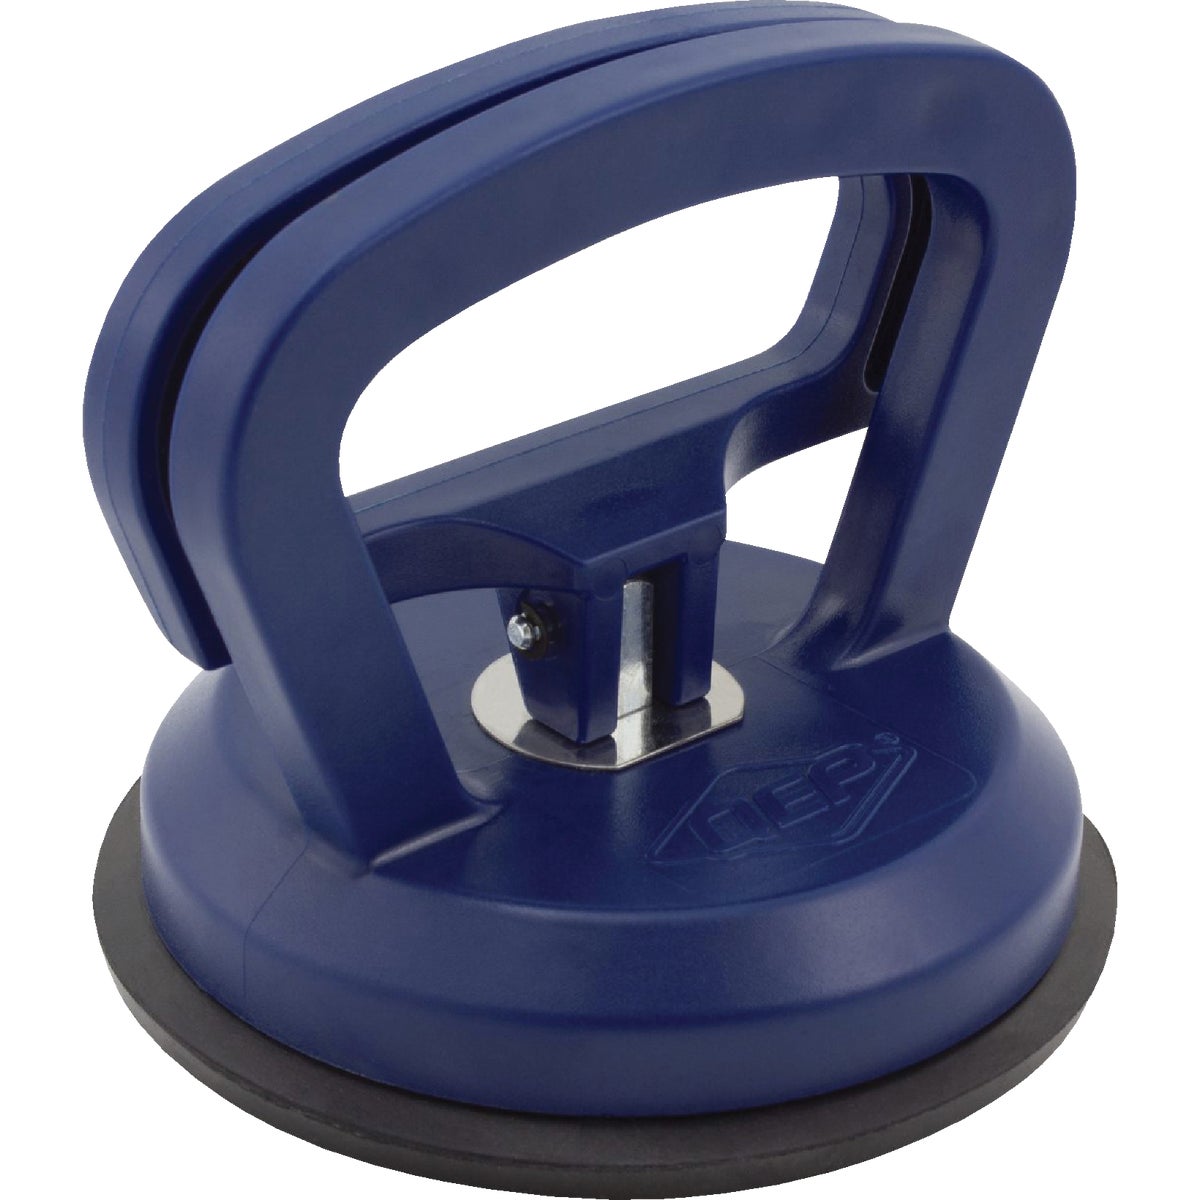 SINGLE SUCTION CUP HNDLE